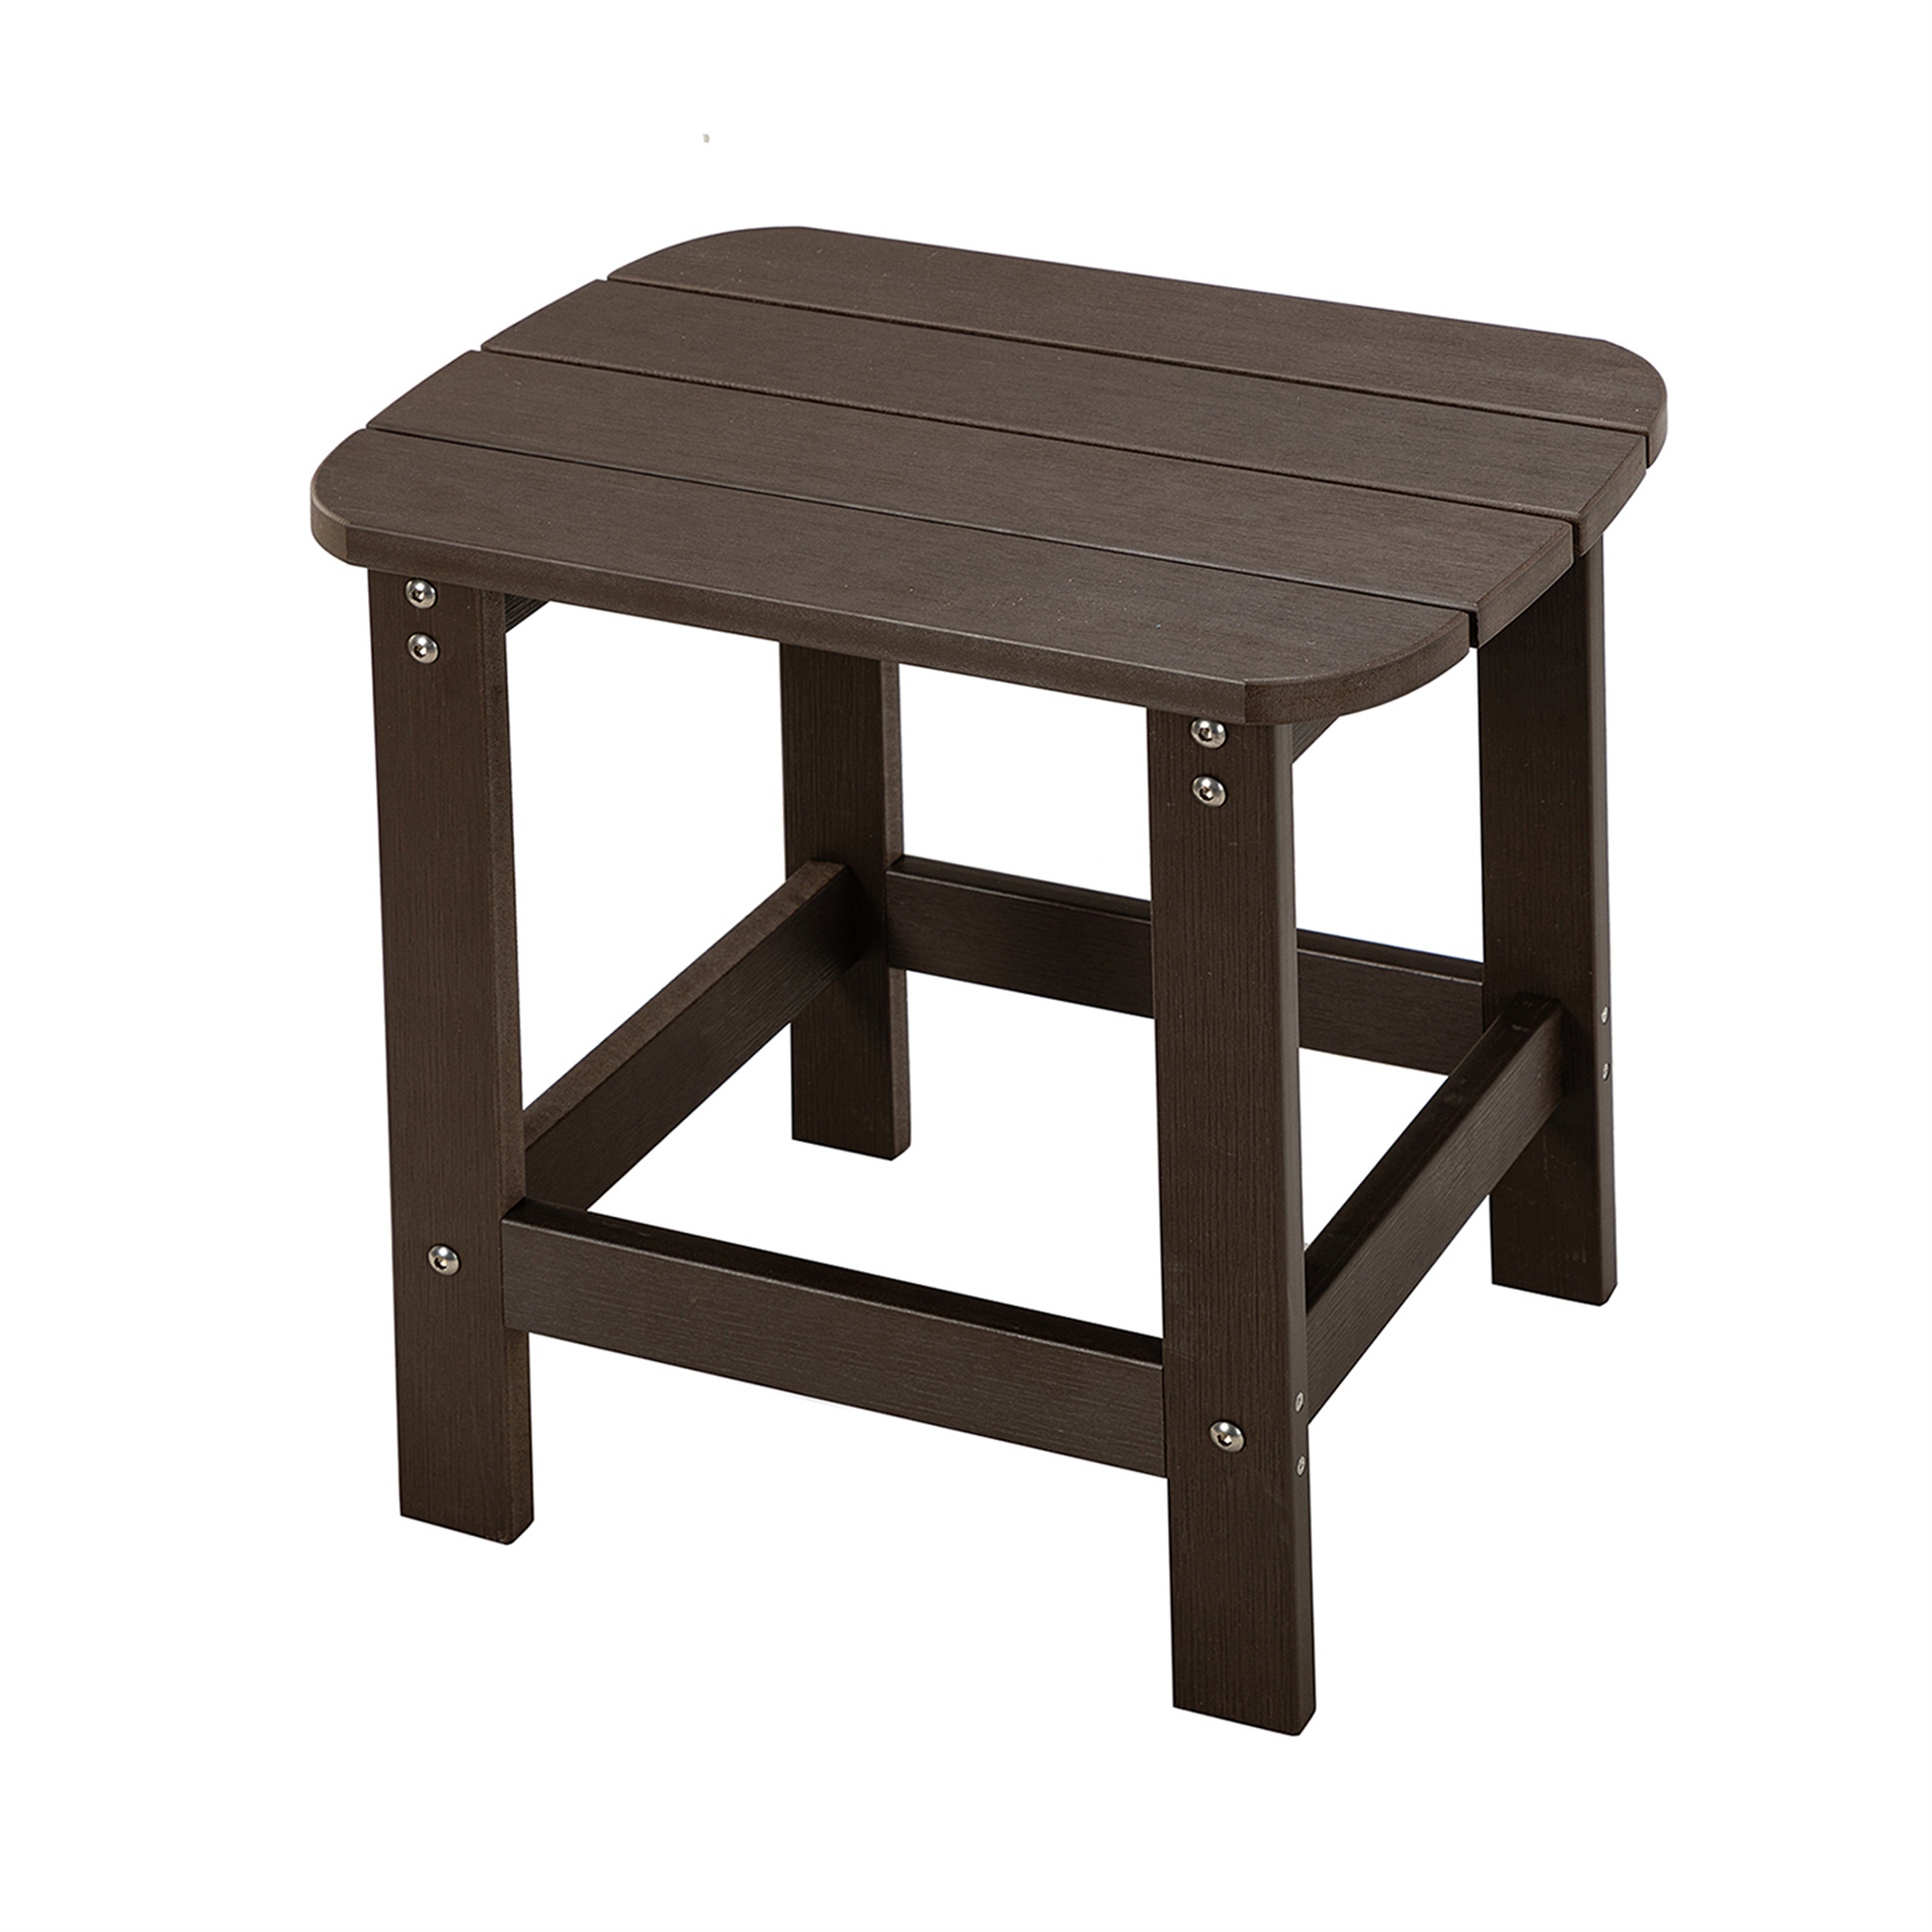 Cfowner Square Outdoor Side Table, Pool Composite Patio Table, End Tables for Backyard, Easy Maintenance, Brown - image 3 of 7